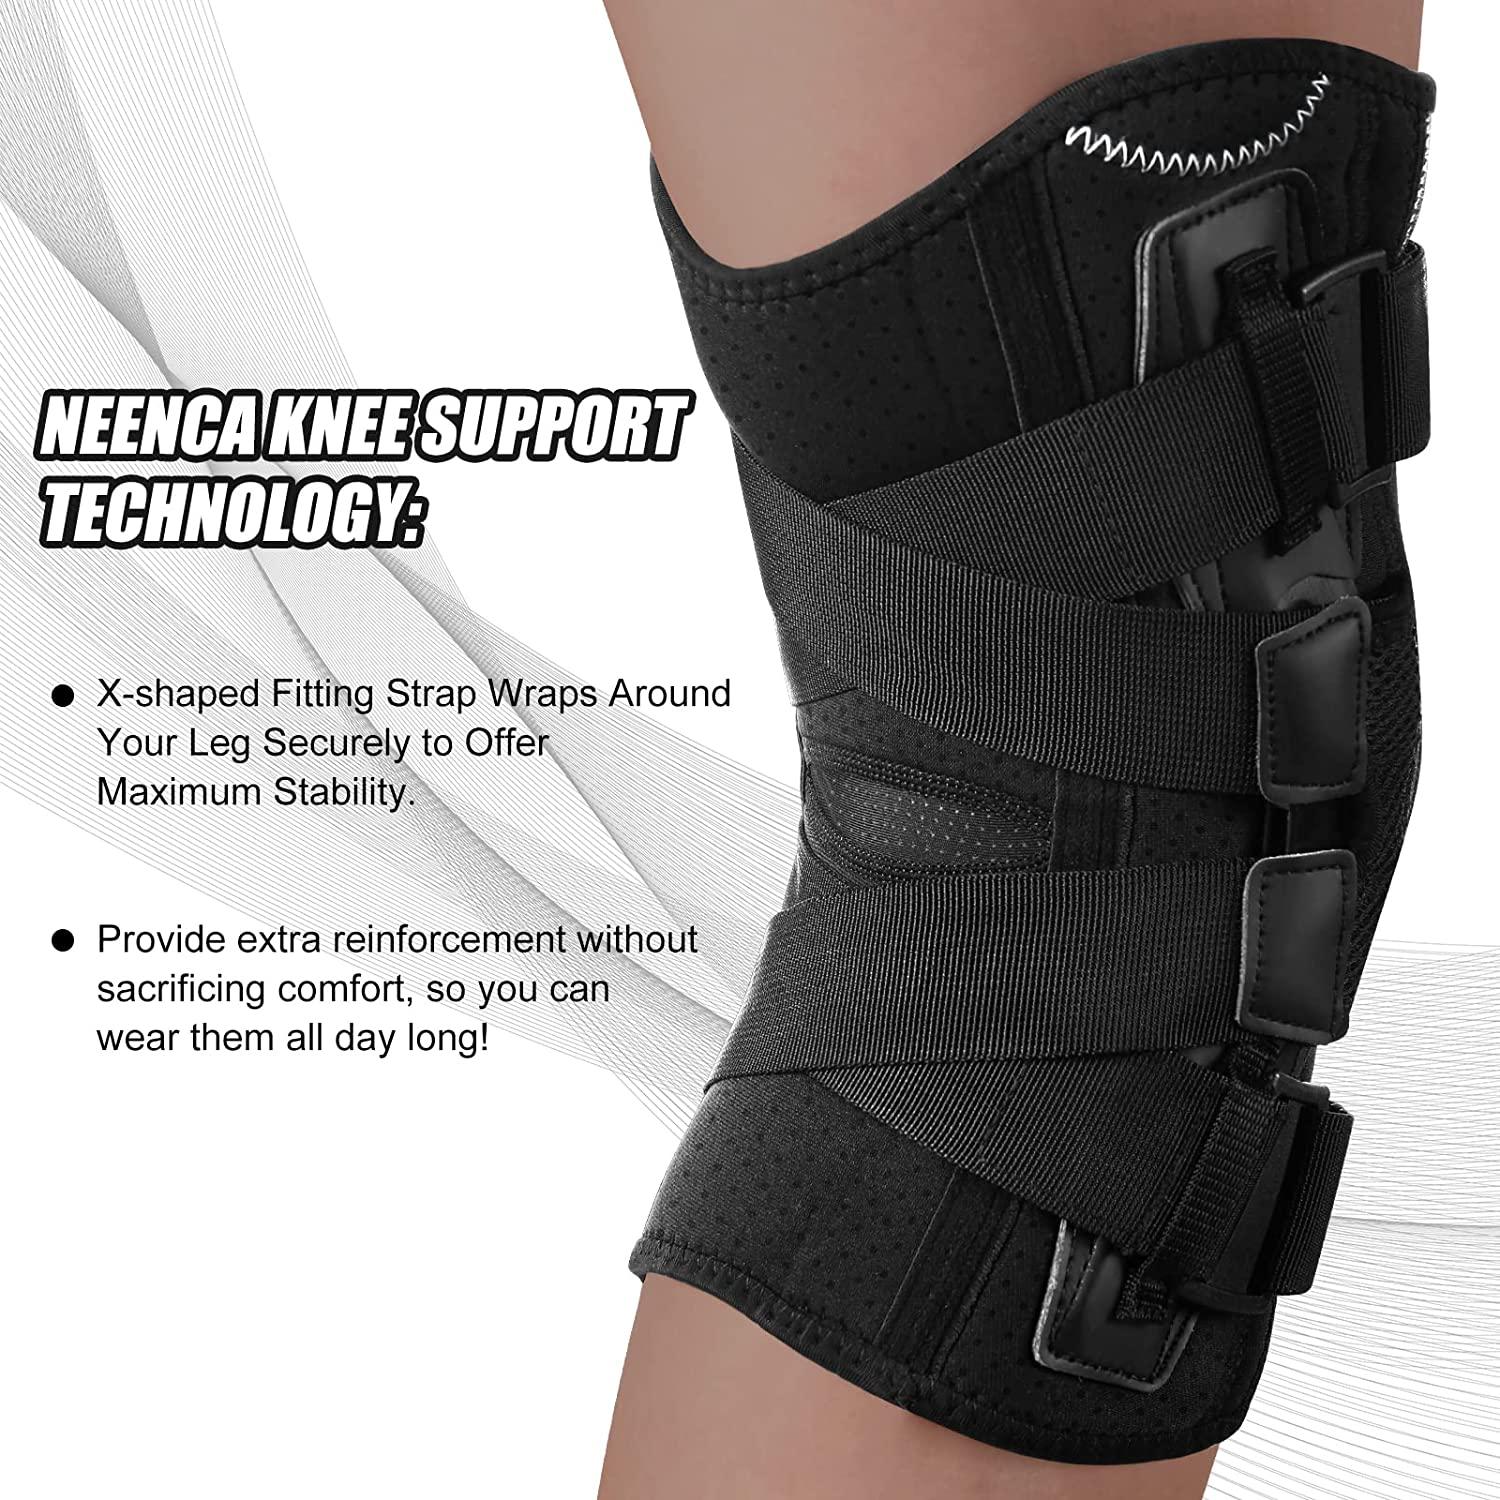 meniscus knee brace, meniscus knee brace Suppliers and Manufacturers at